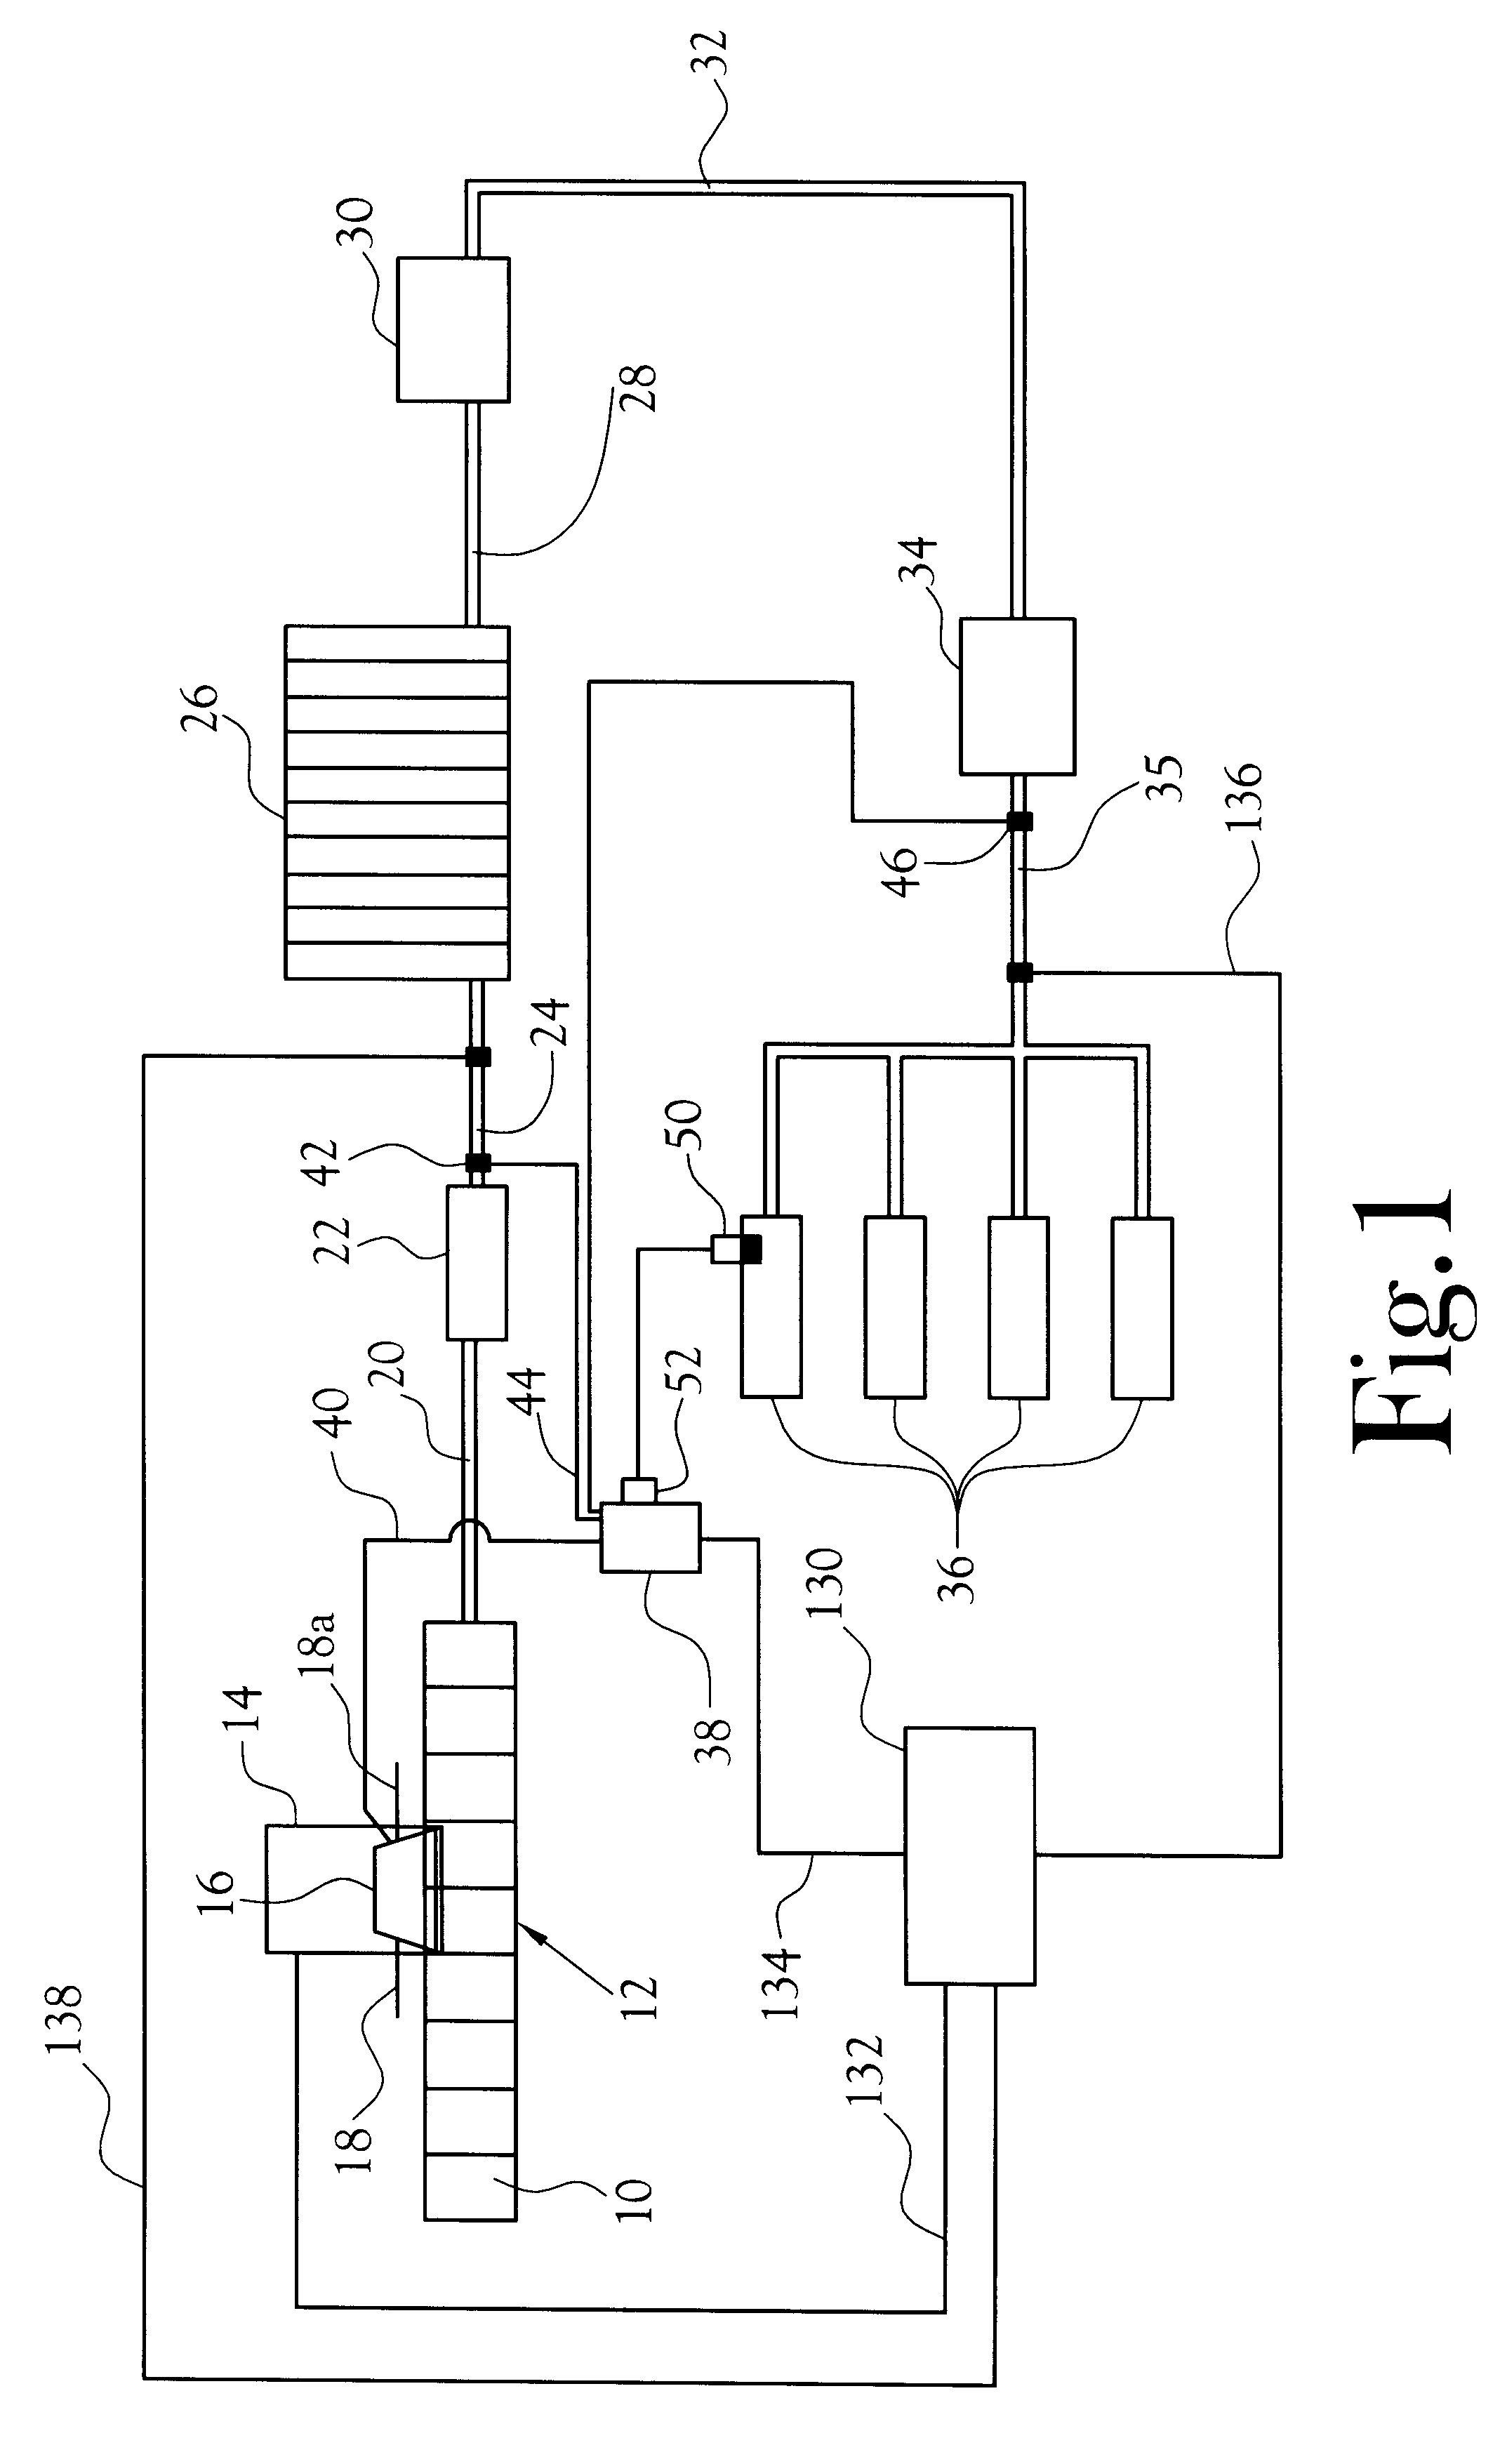 Method and apparatus for conditioning textile fibers